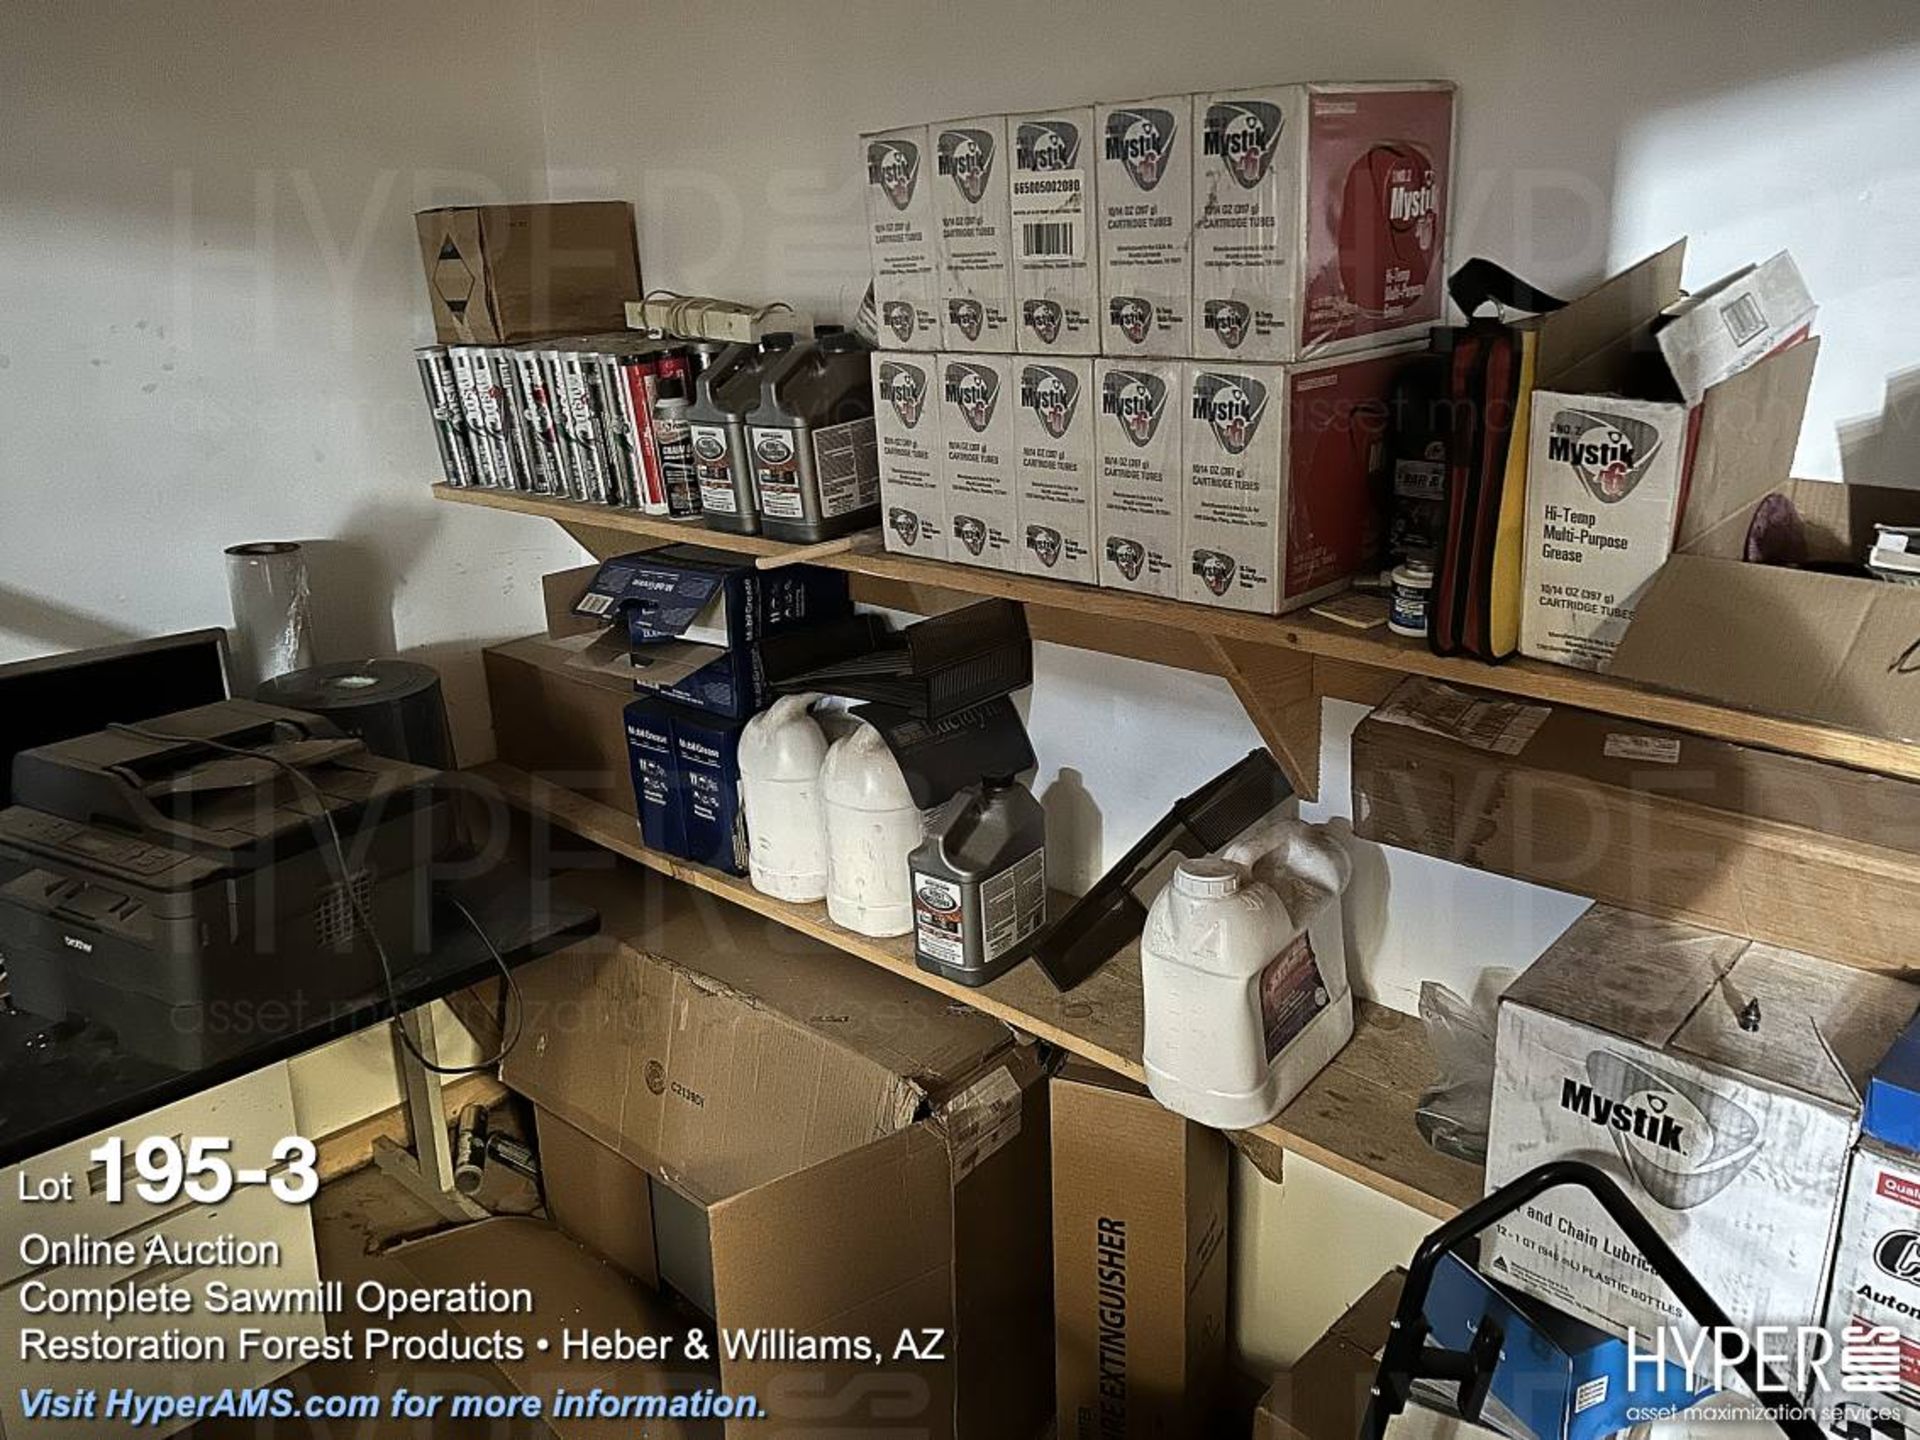 Lot: Lights, desks, table, refrigerator, shelves, grease and supplies - Image 3 of 5